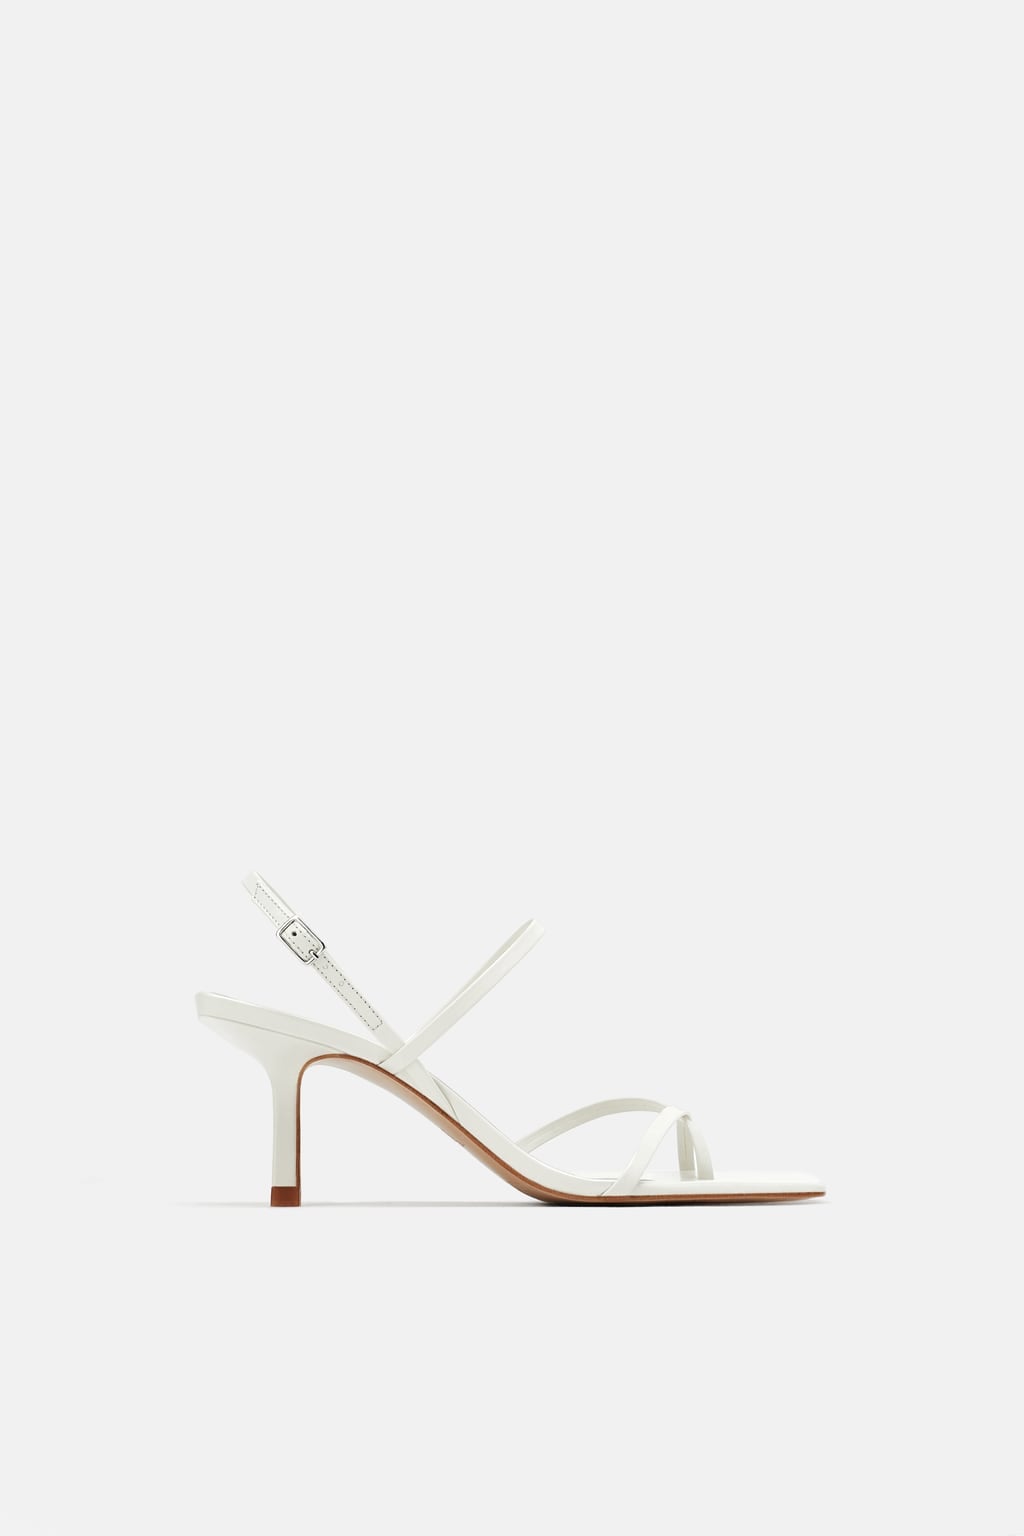 AEYDE Mikita leather sandals | NET-A-PORTER